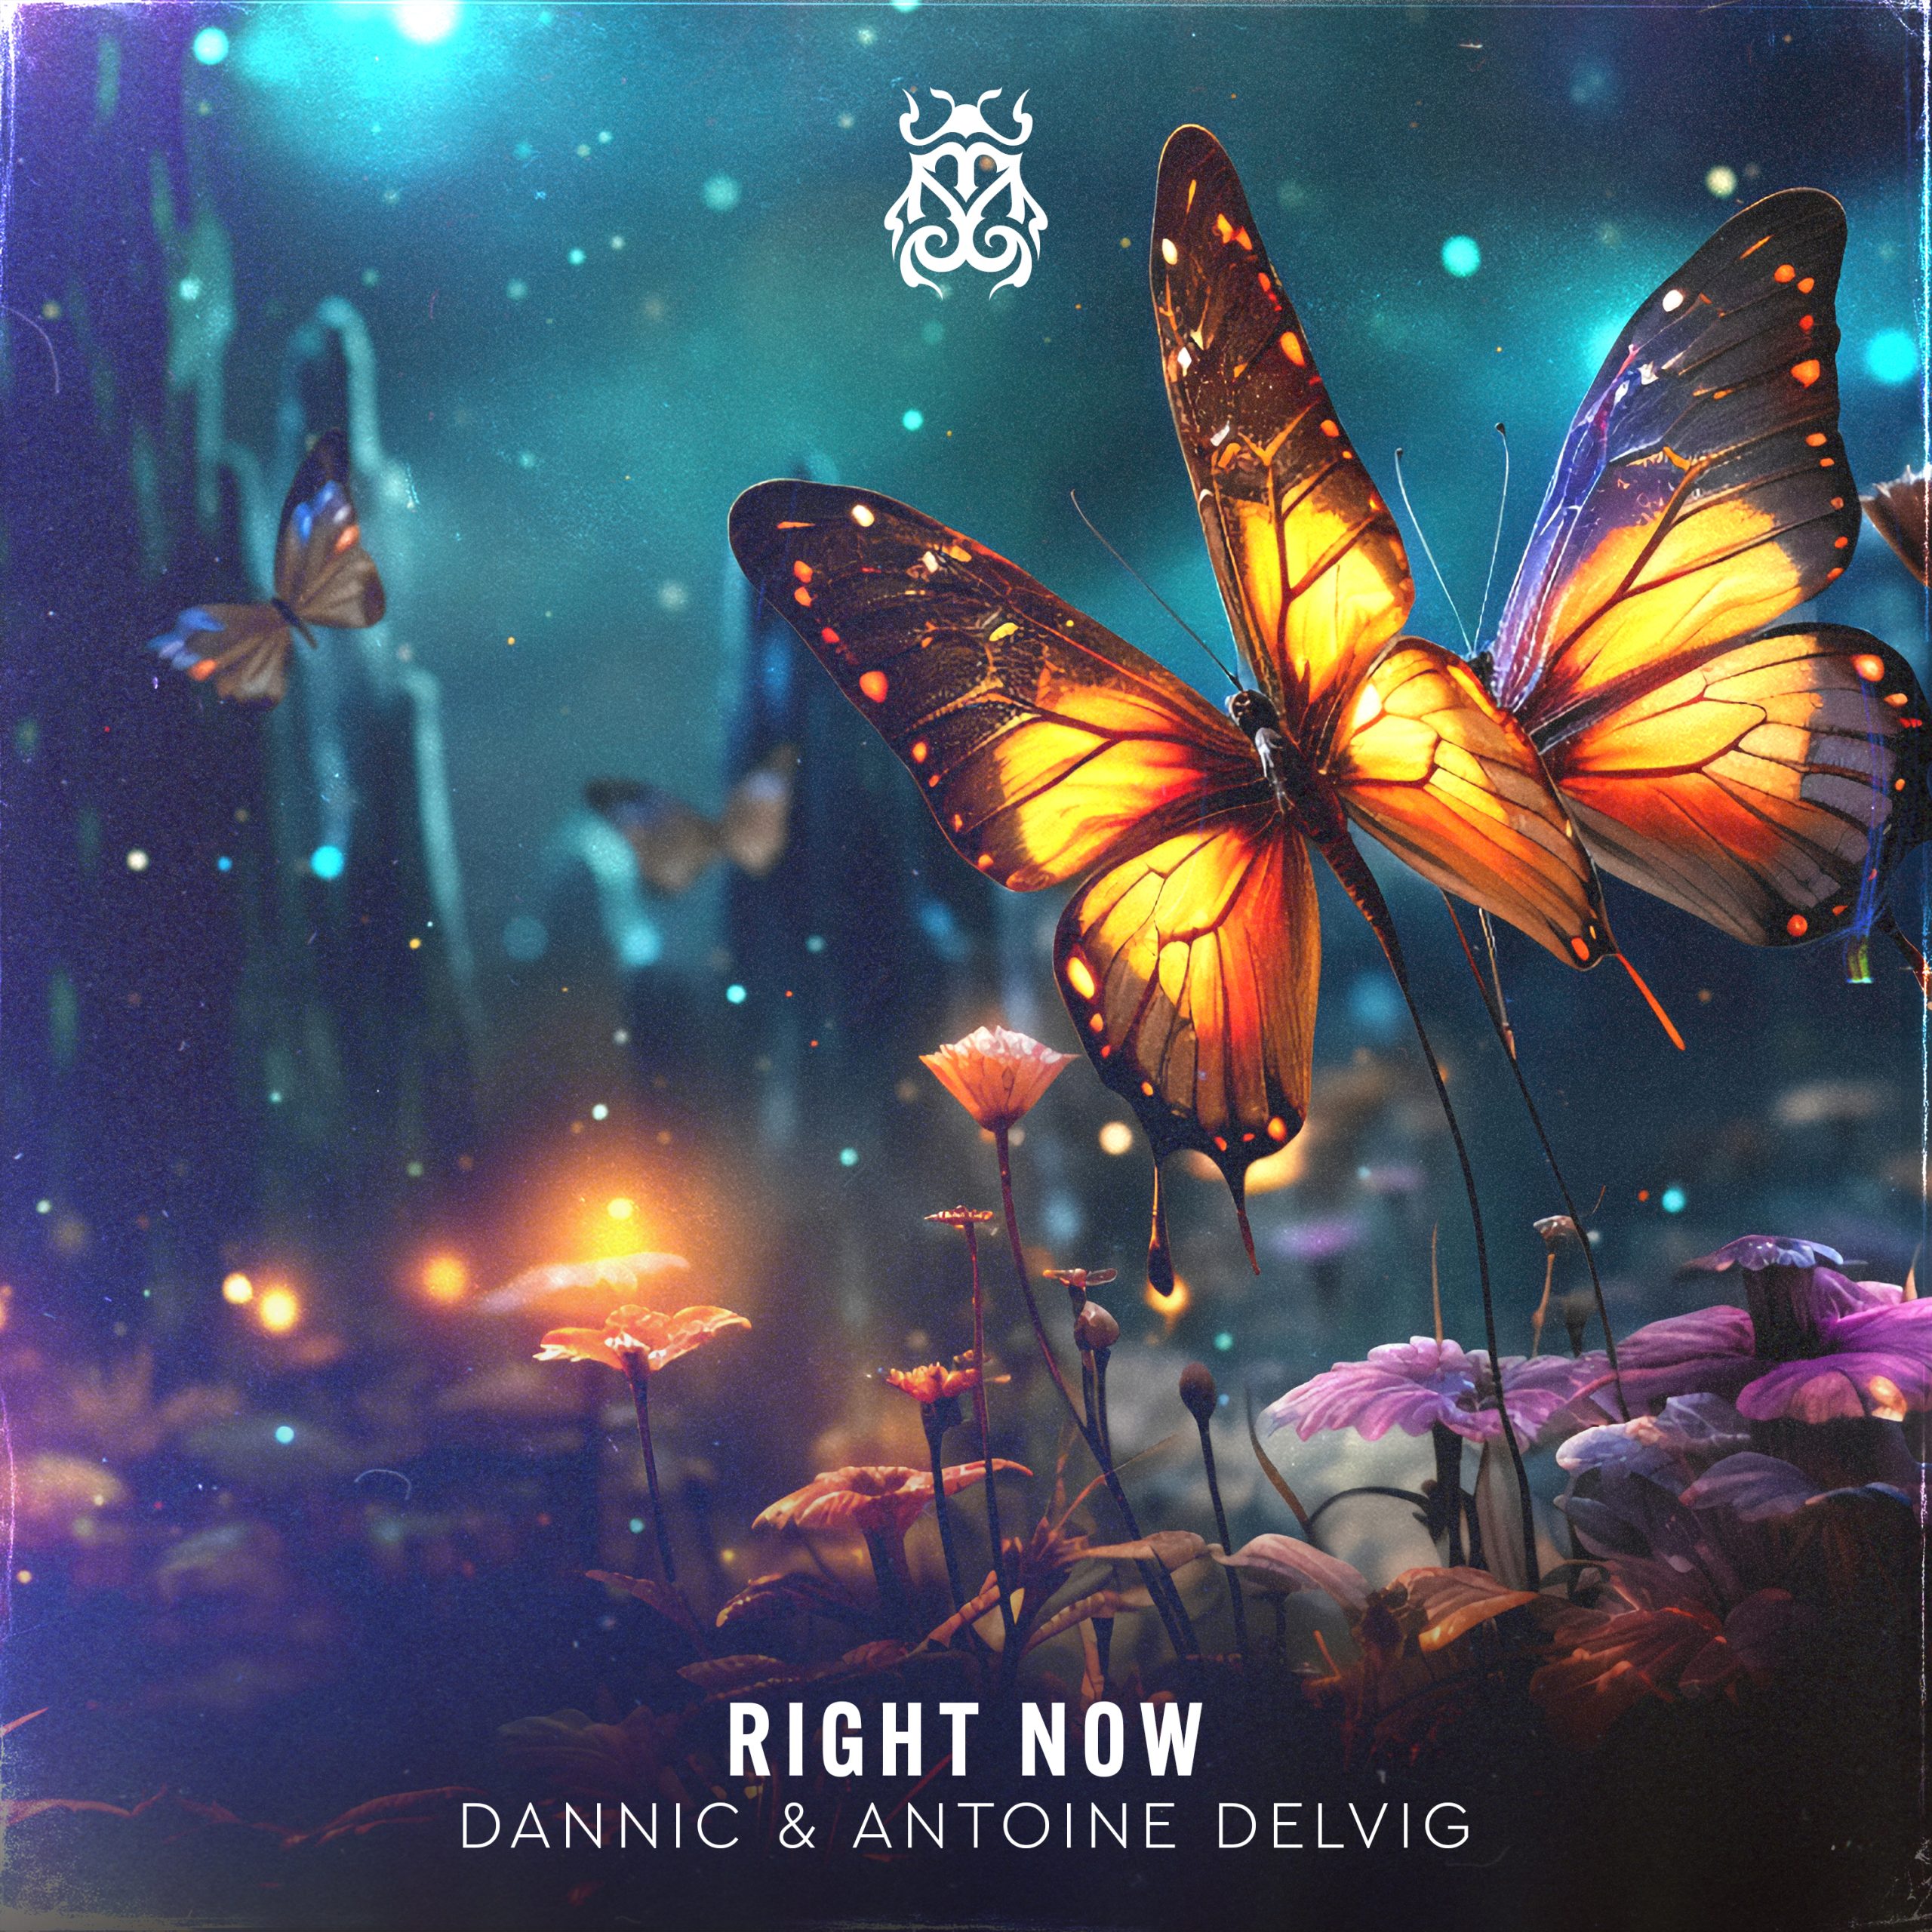 Dannic releases “Right Now” on Tomorrowland Music